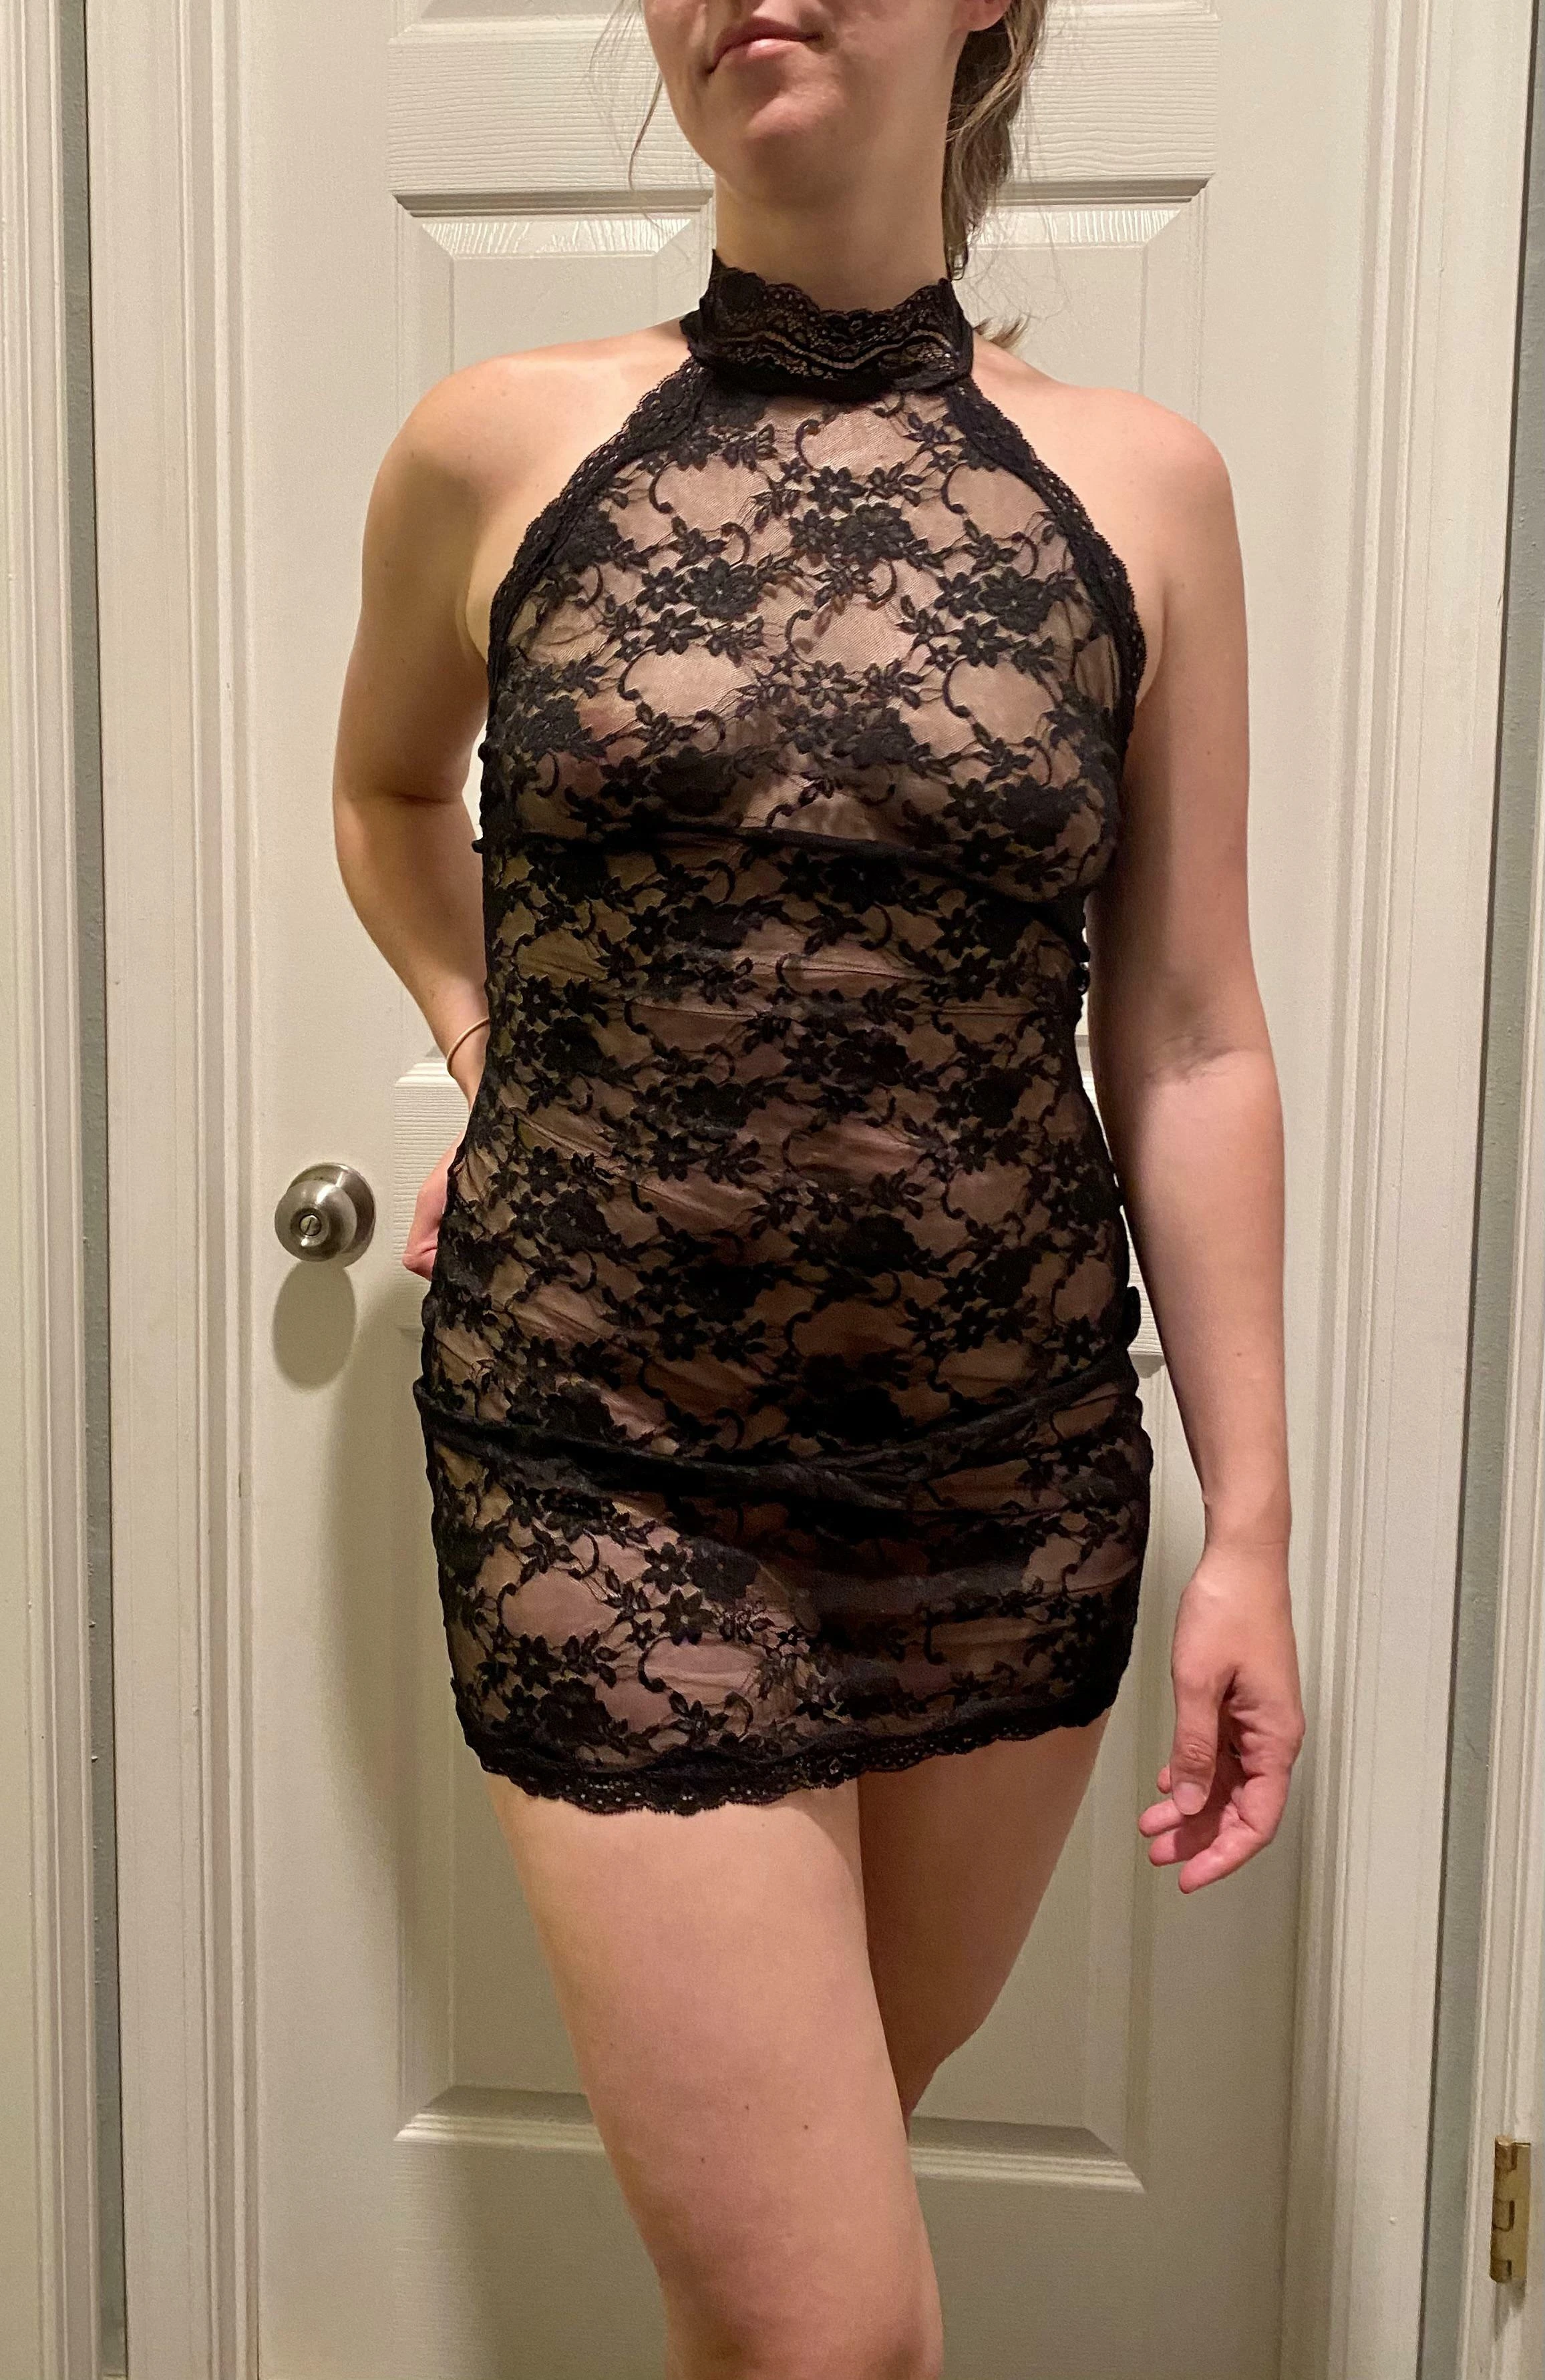 Any interest in sharing an early 30s MILF?